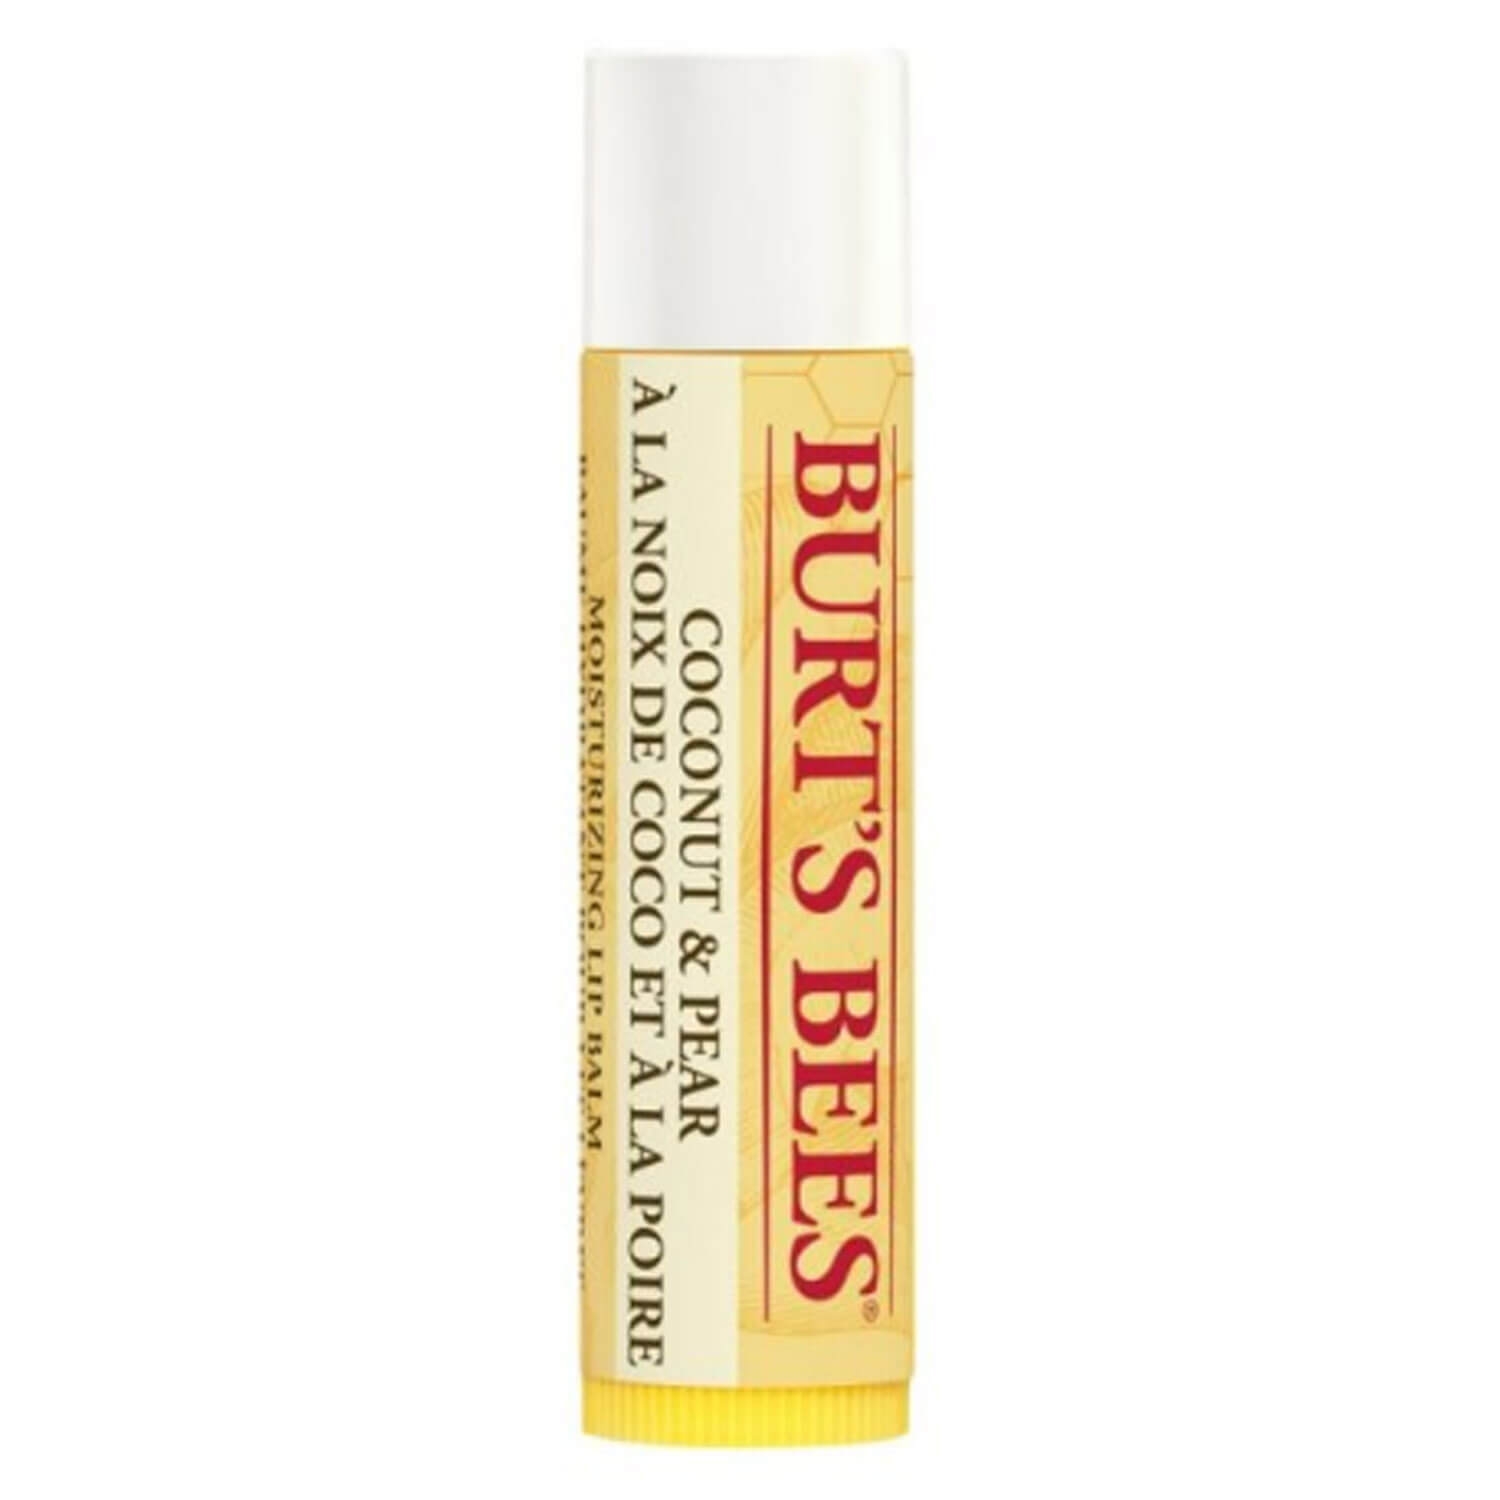 Product image from Burt's Bees - Lip Balm Coconut & Pear